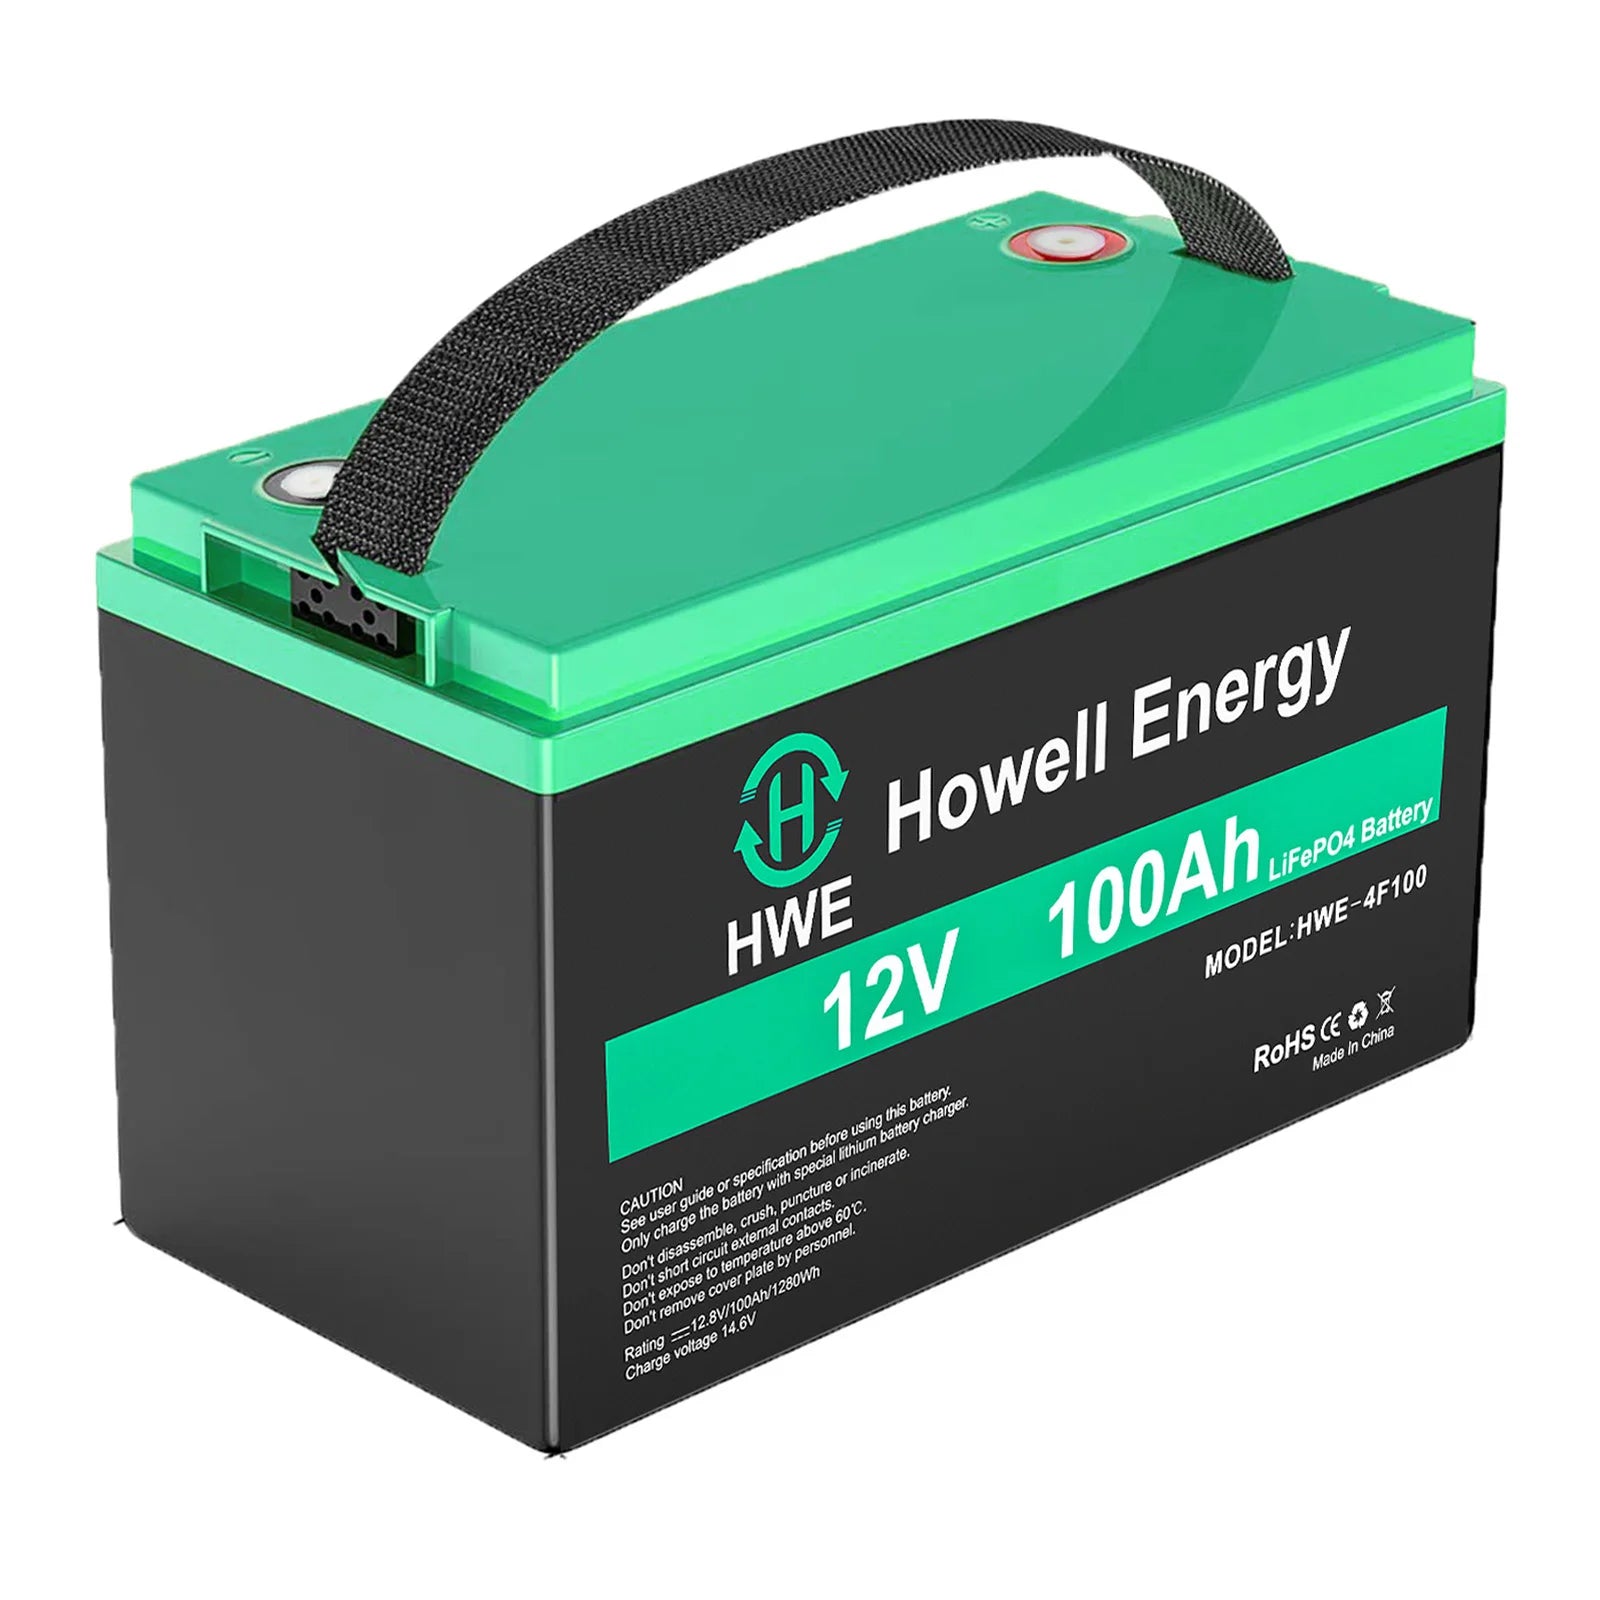 Howell 12v 100ah Battery, High-capacity solar storage solution with built-in BMS for RVs, boats, and more.